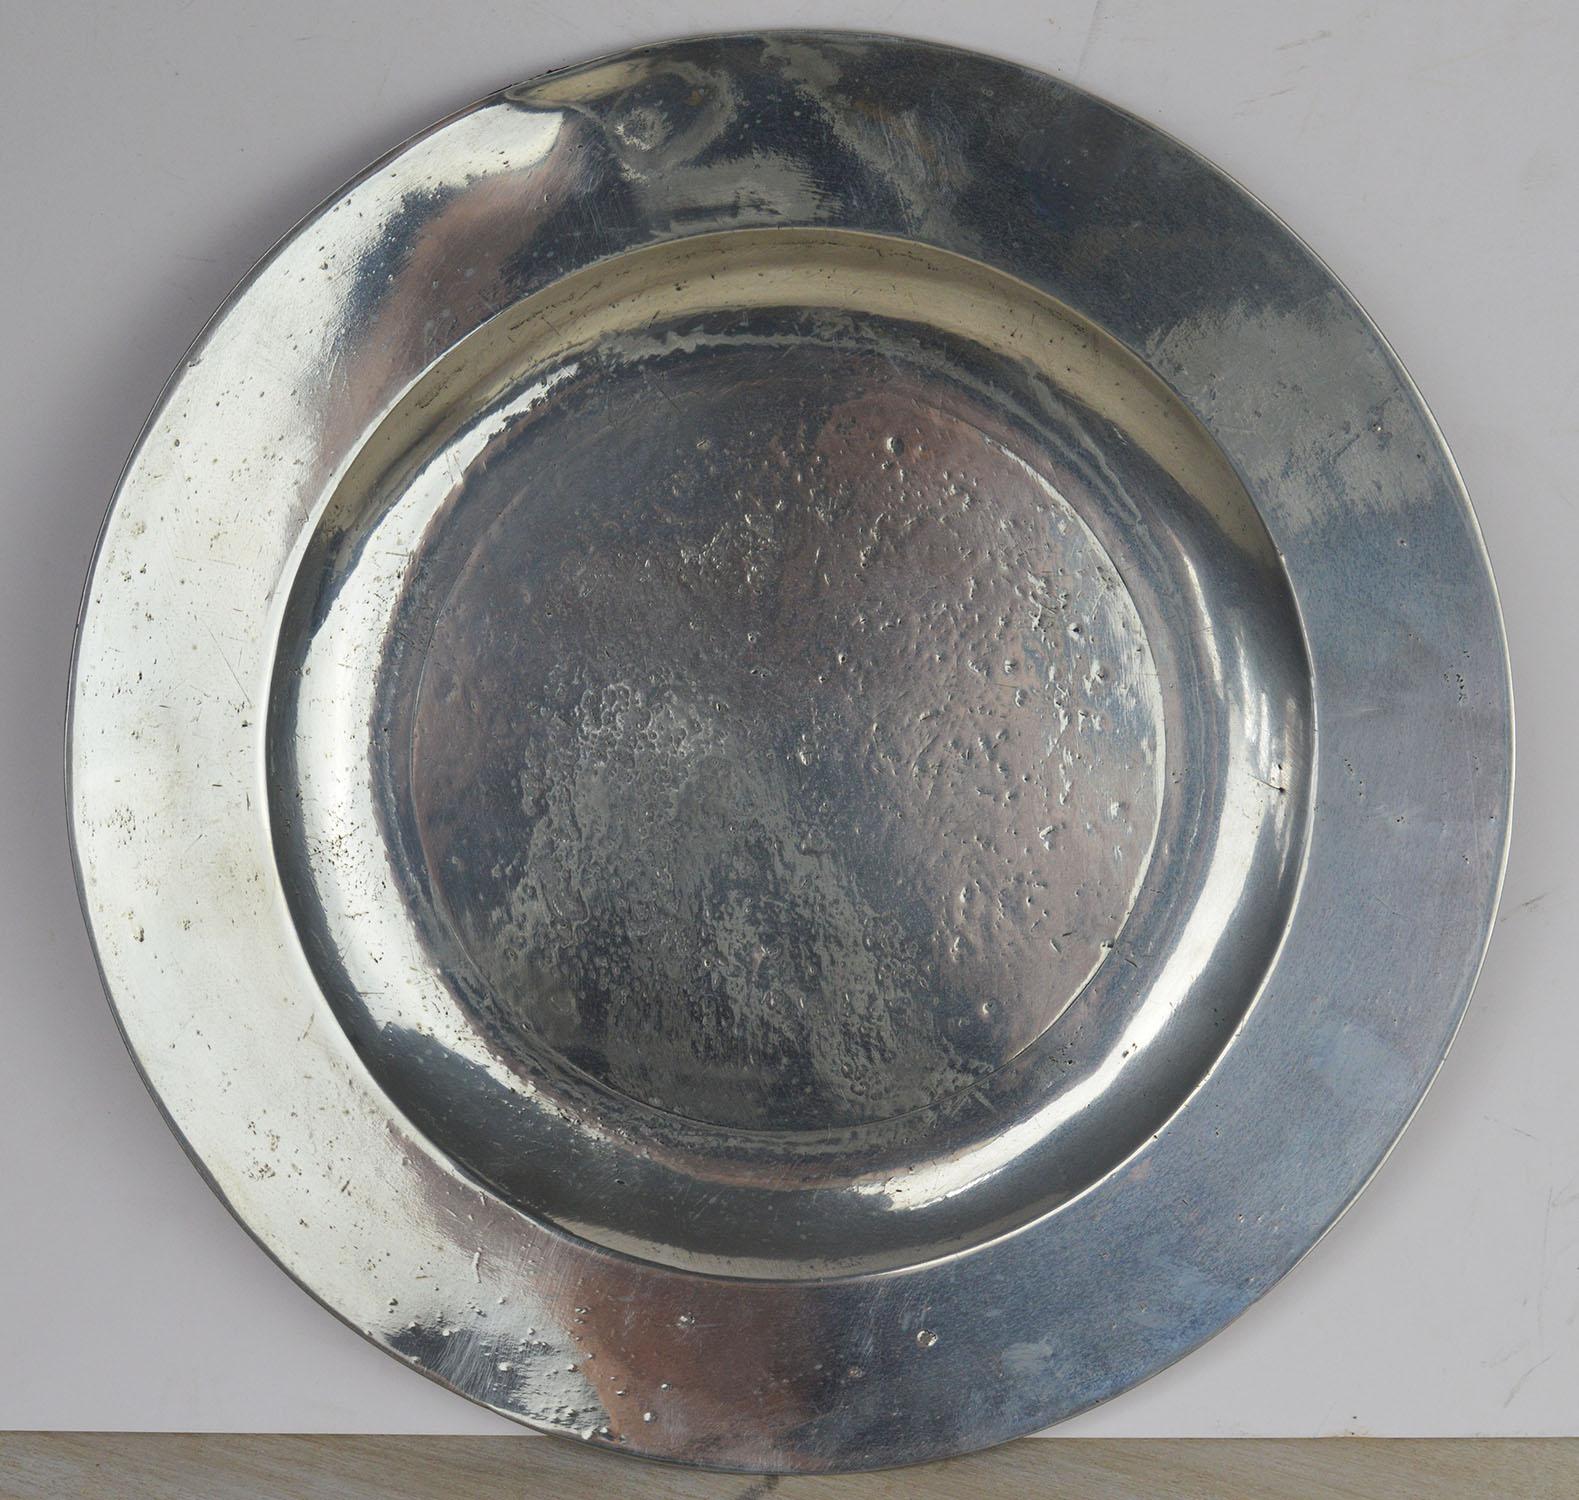 Wonderful highly polished chargers. A lovely distressed Industrial look.

Traces of the makers marks on the undersides

The pewter has been polished to its original shine. It was known as the Poor Man's Silver.

The great thing about polished